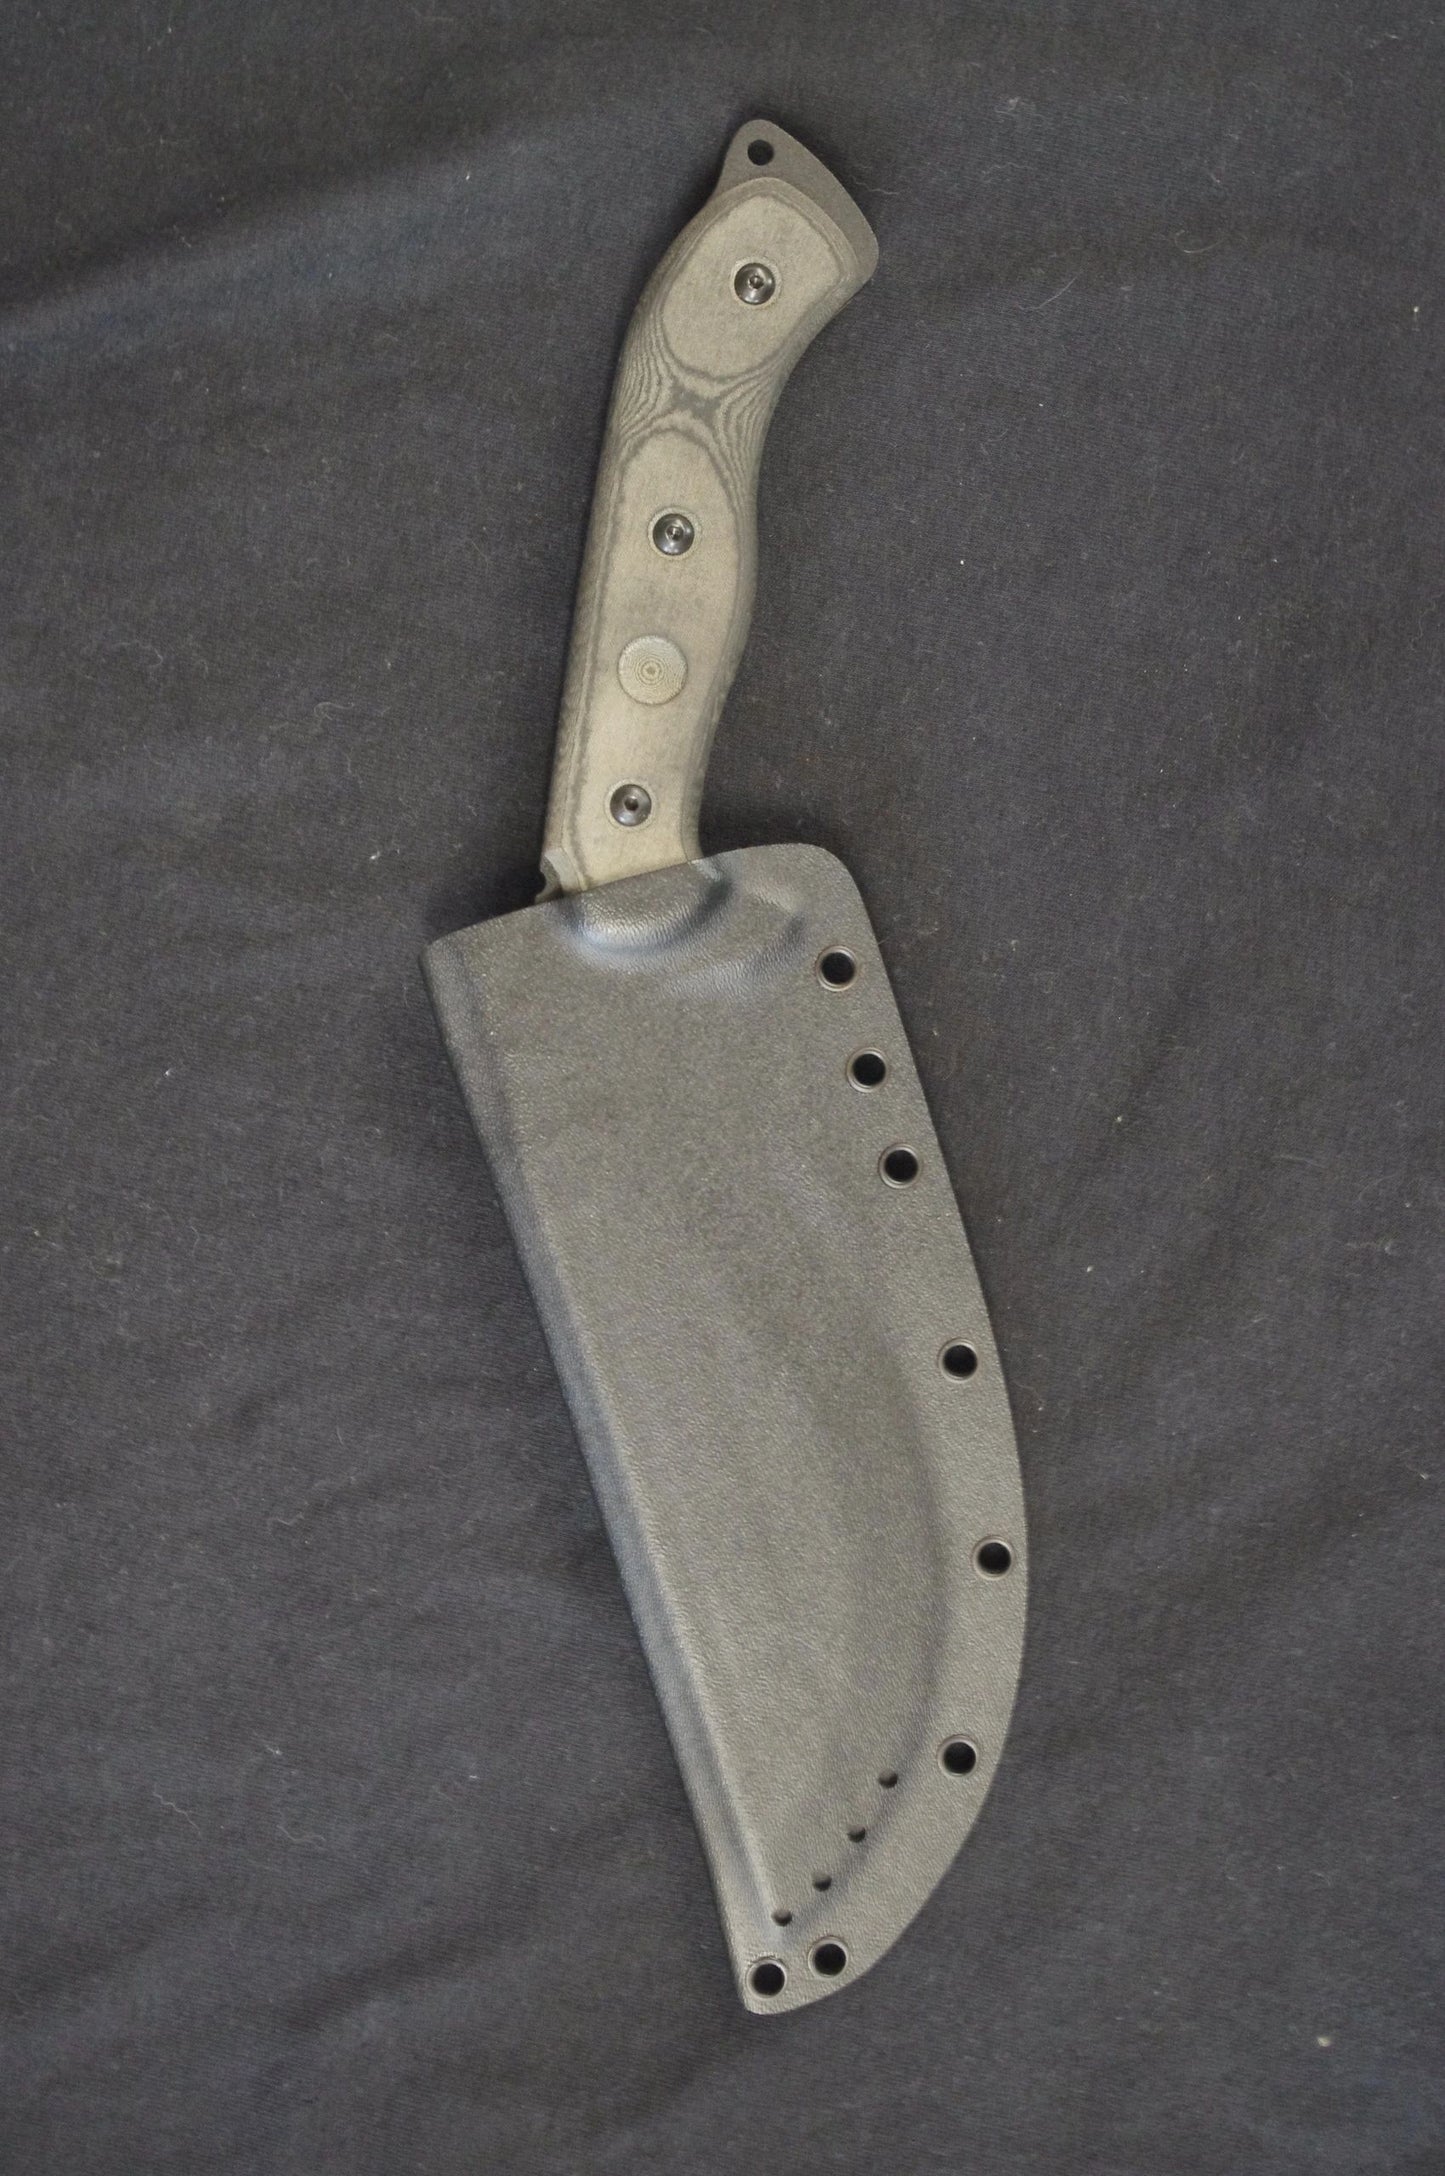 TOPS KNIVES BUSHCRAFTER KUKURI 7.0 CUSTOM KYDEX SHEATH BY RED HILL SHEATHS (Knife not included)